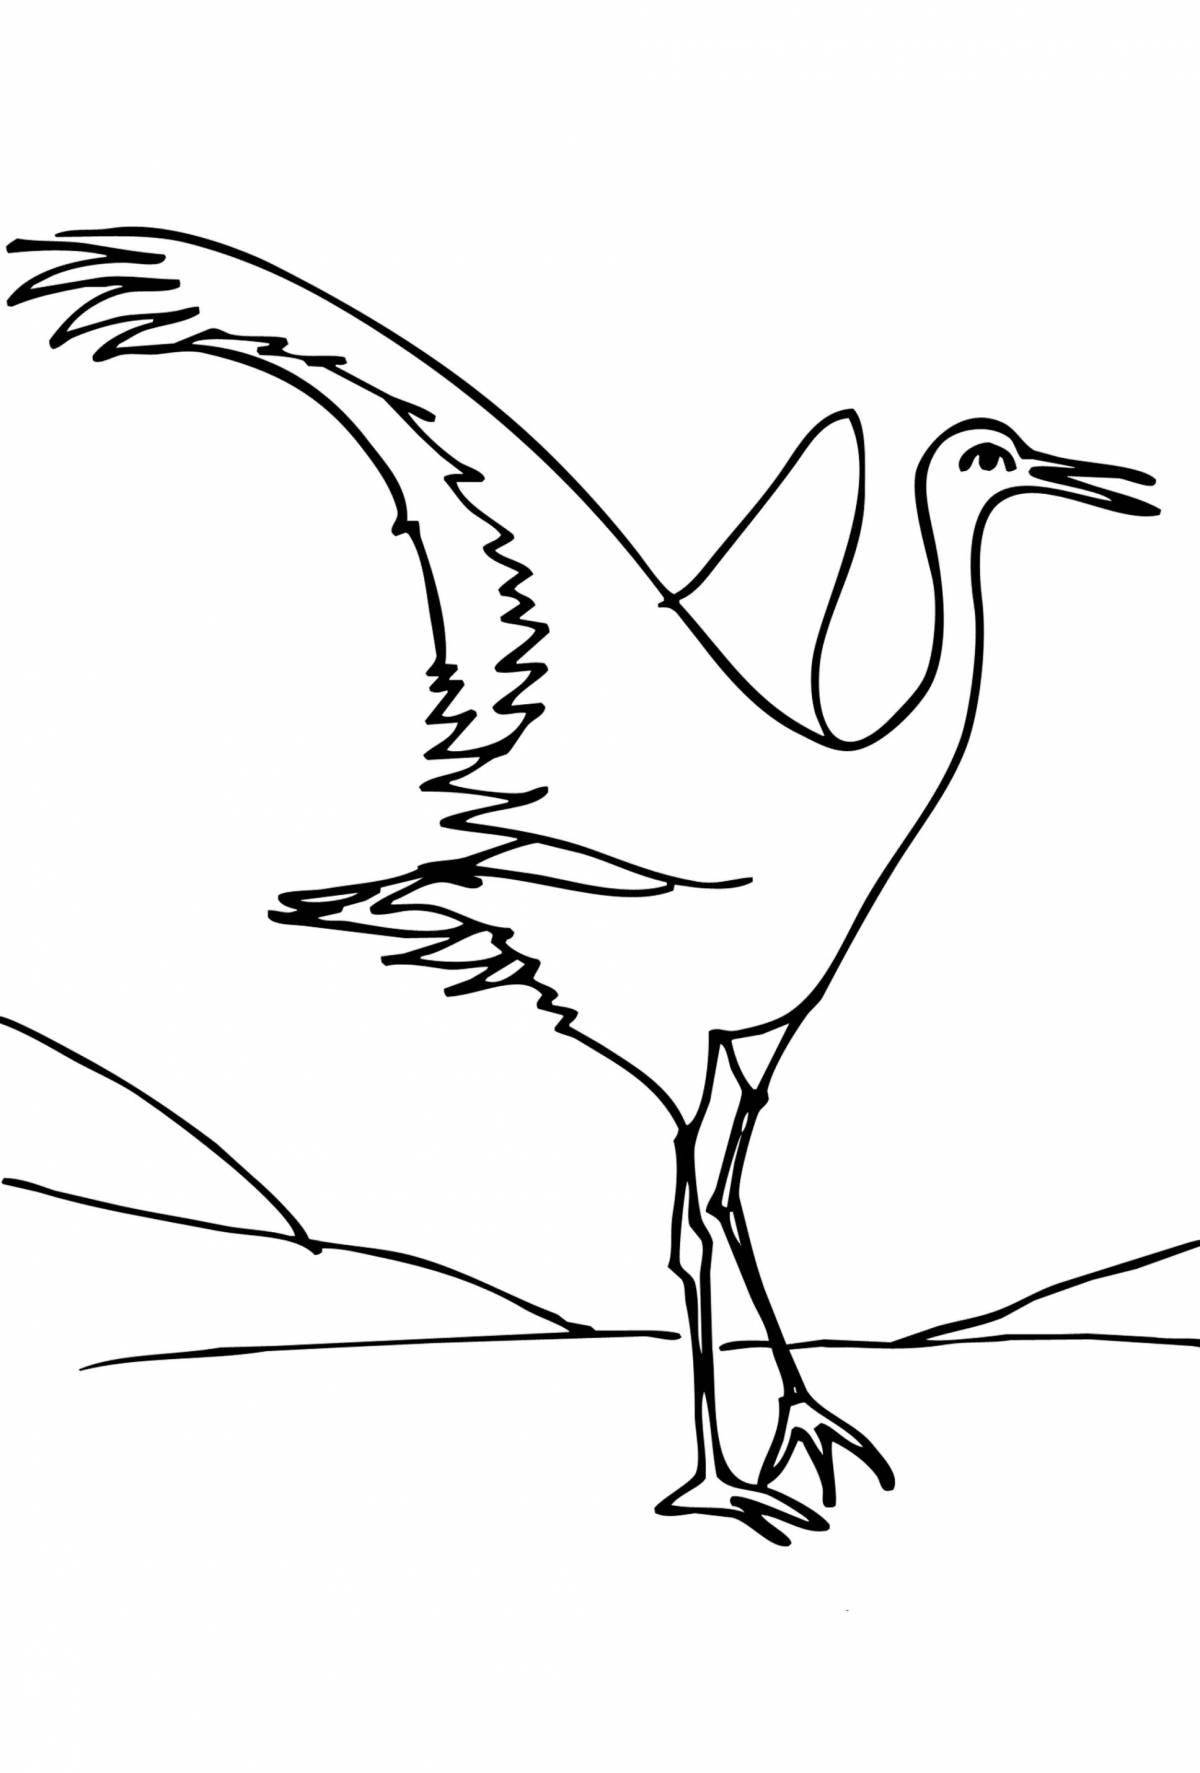 Gorgeous crane coloring book for kids